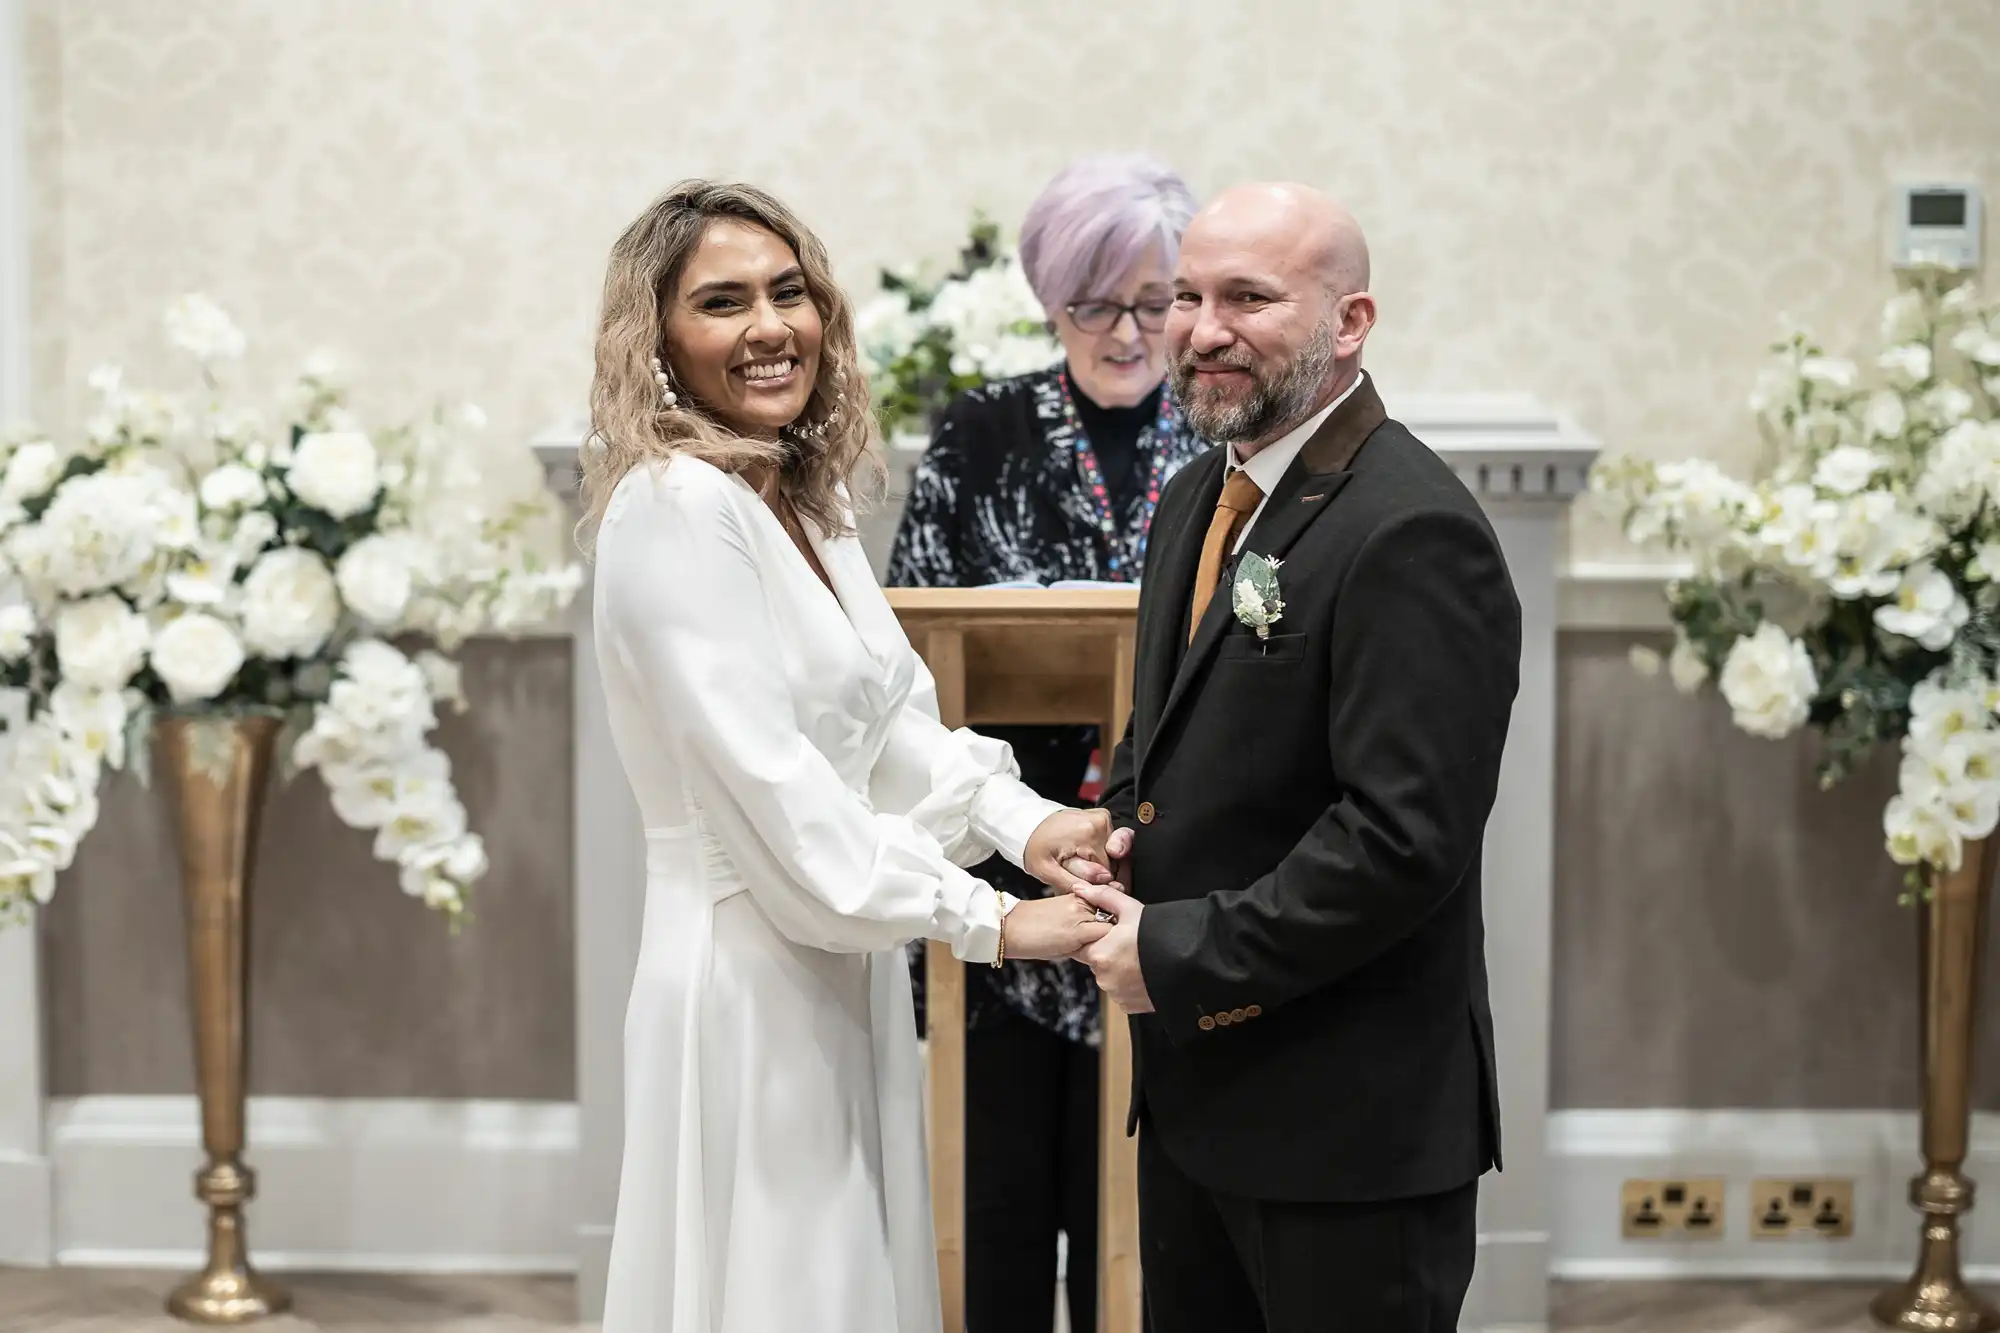 A couple holds hands and smiles at their wedding ceremony, with the officiant standing behind them. There are flower arrangements on either side.